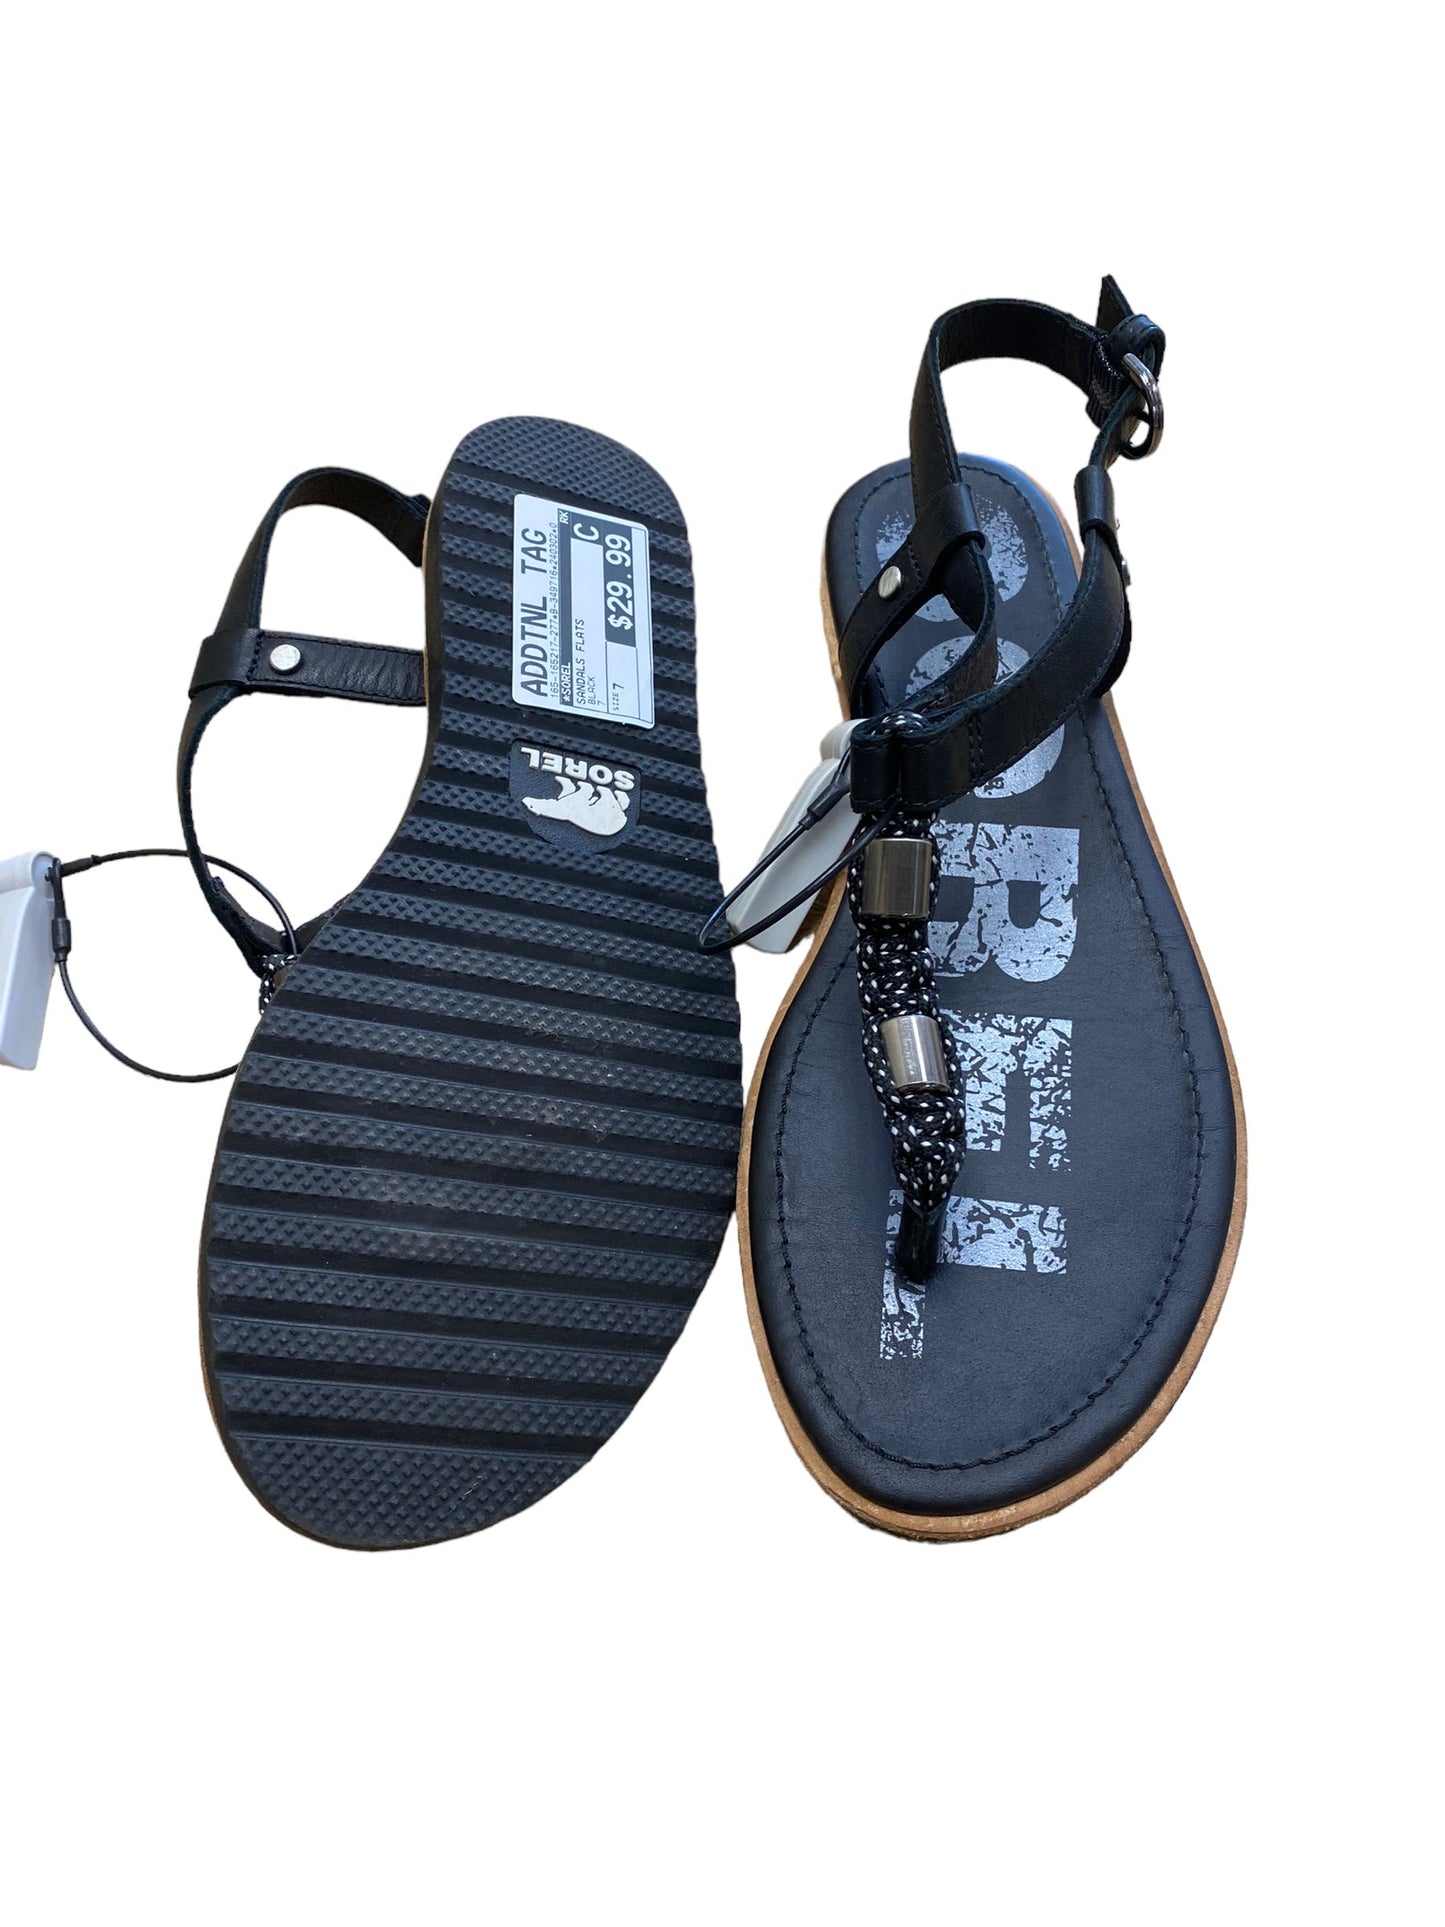 Sandals Flats By Sorel  Size: 7